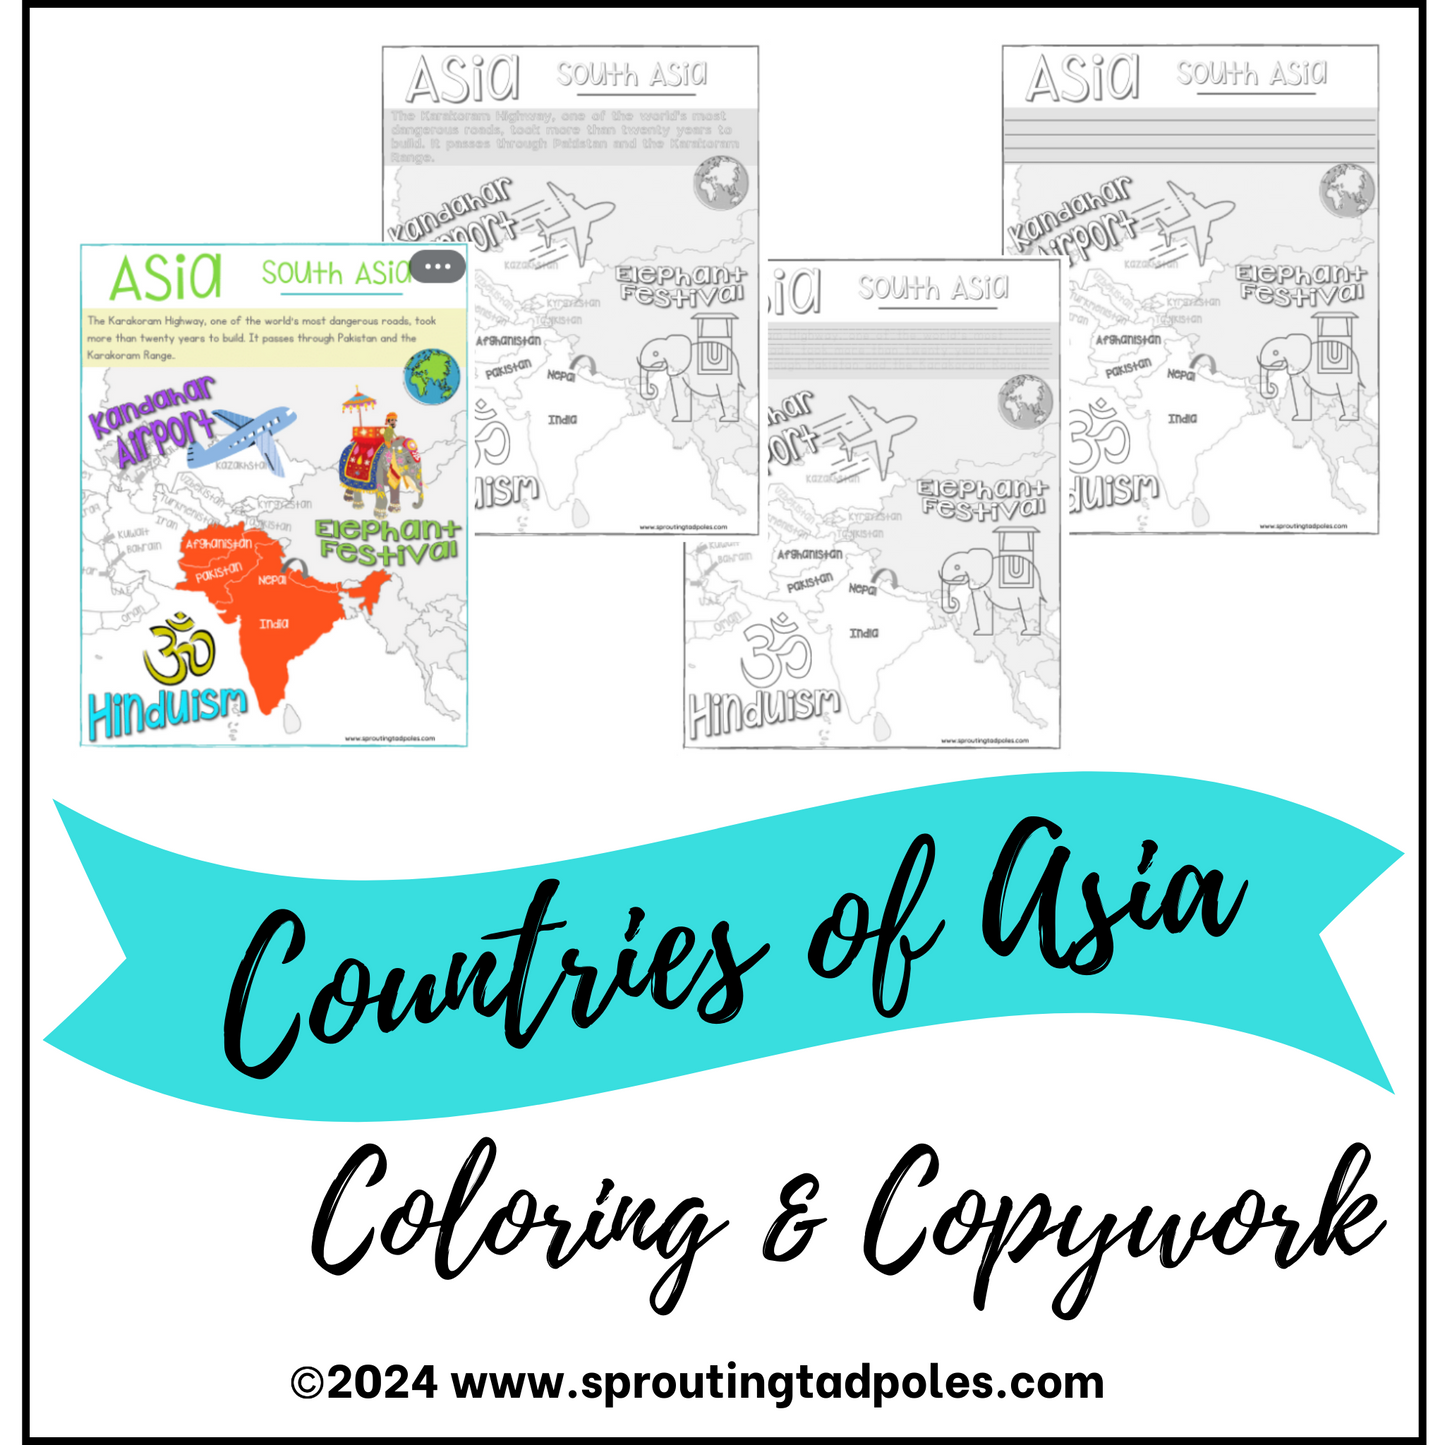 Geography of Asia Coloring & Copywork